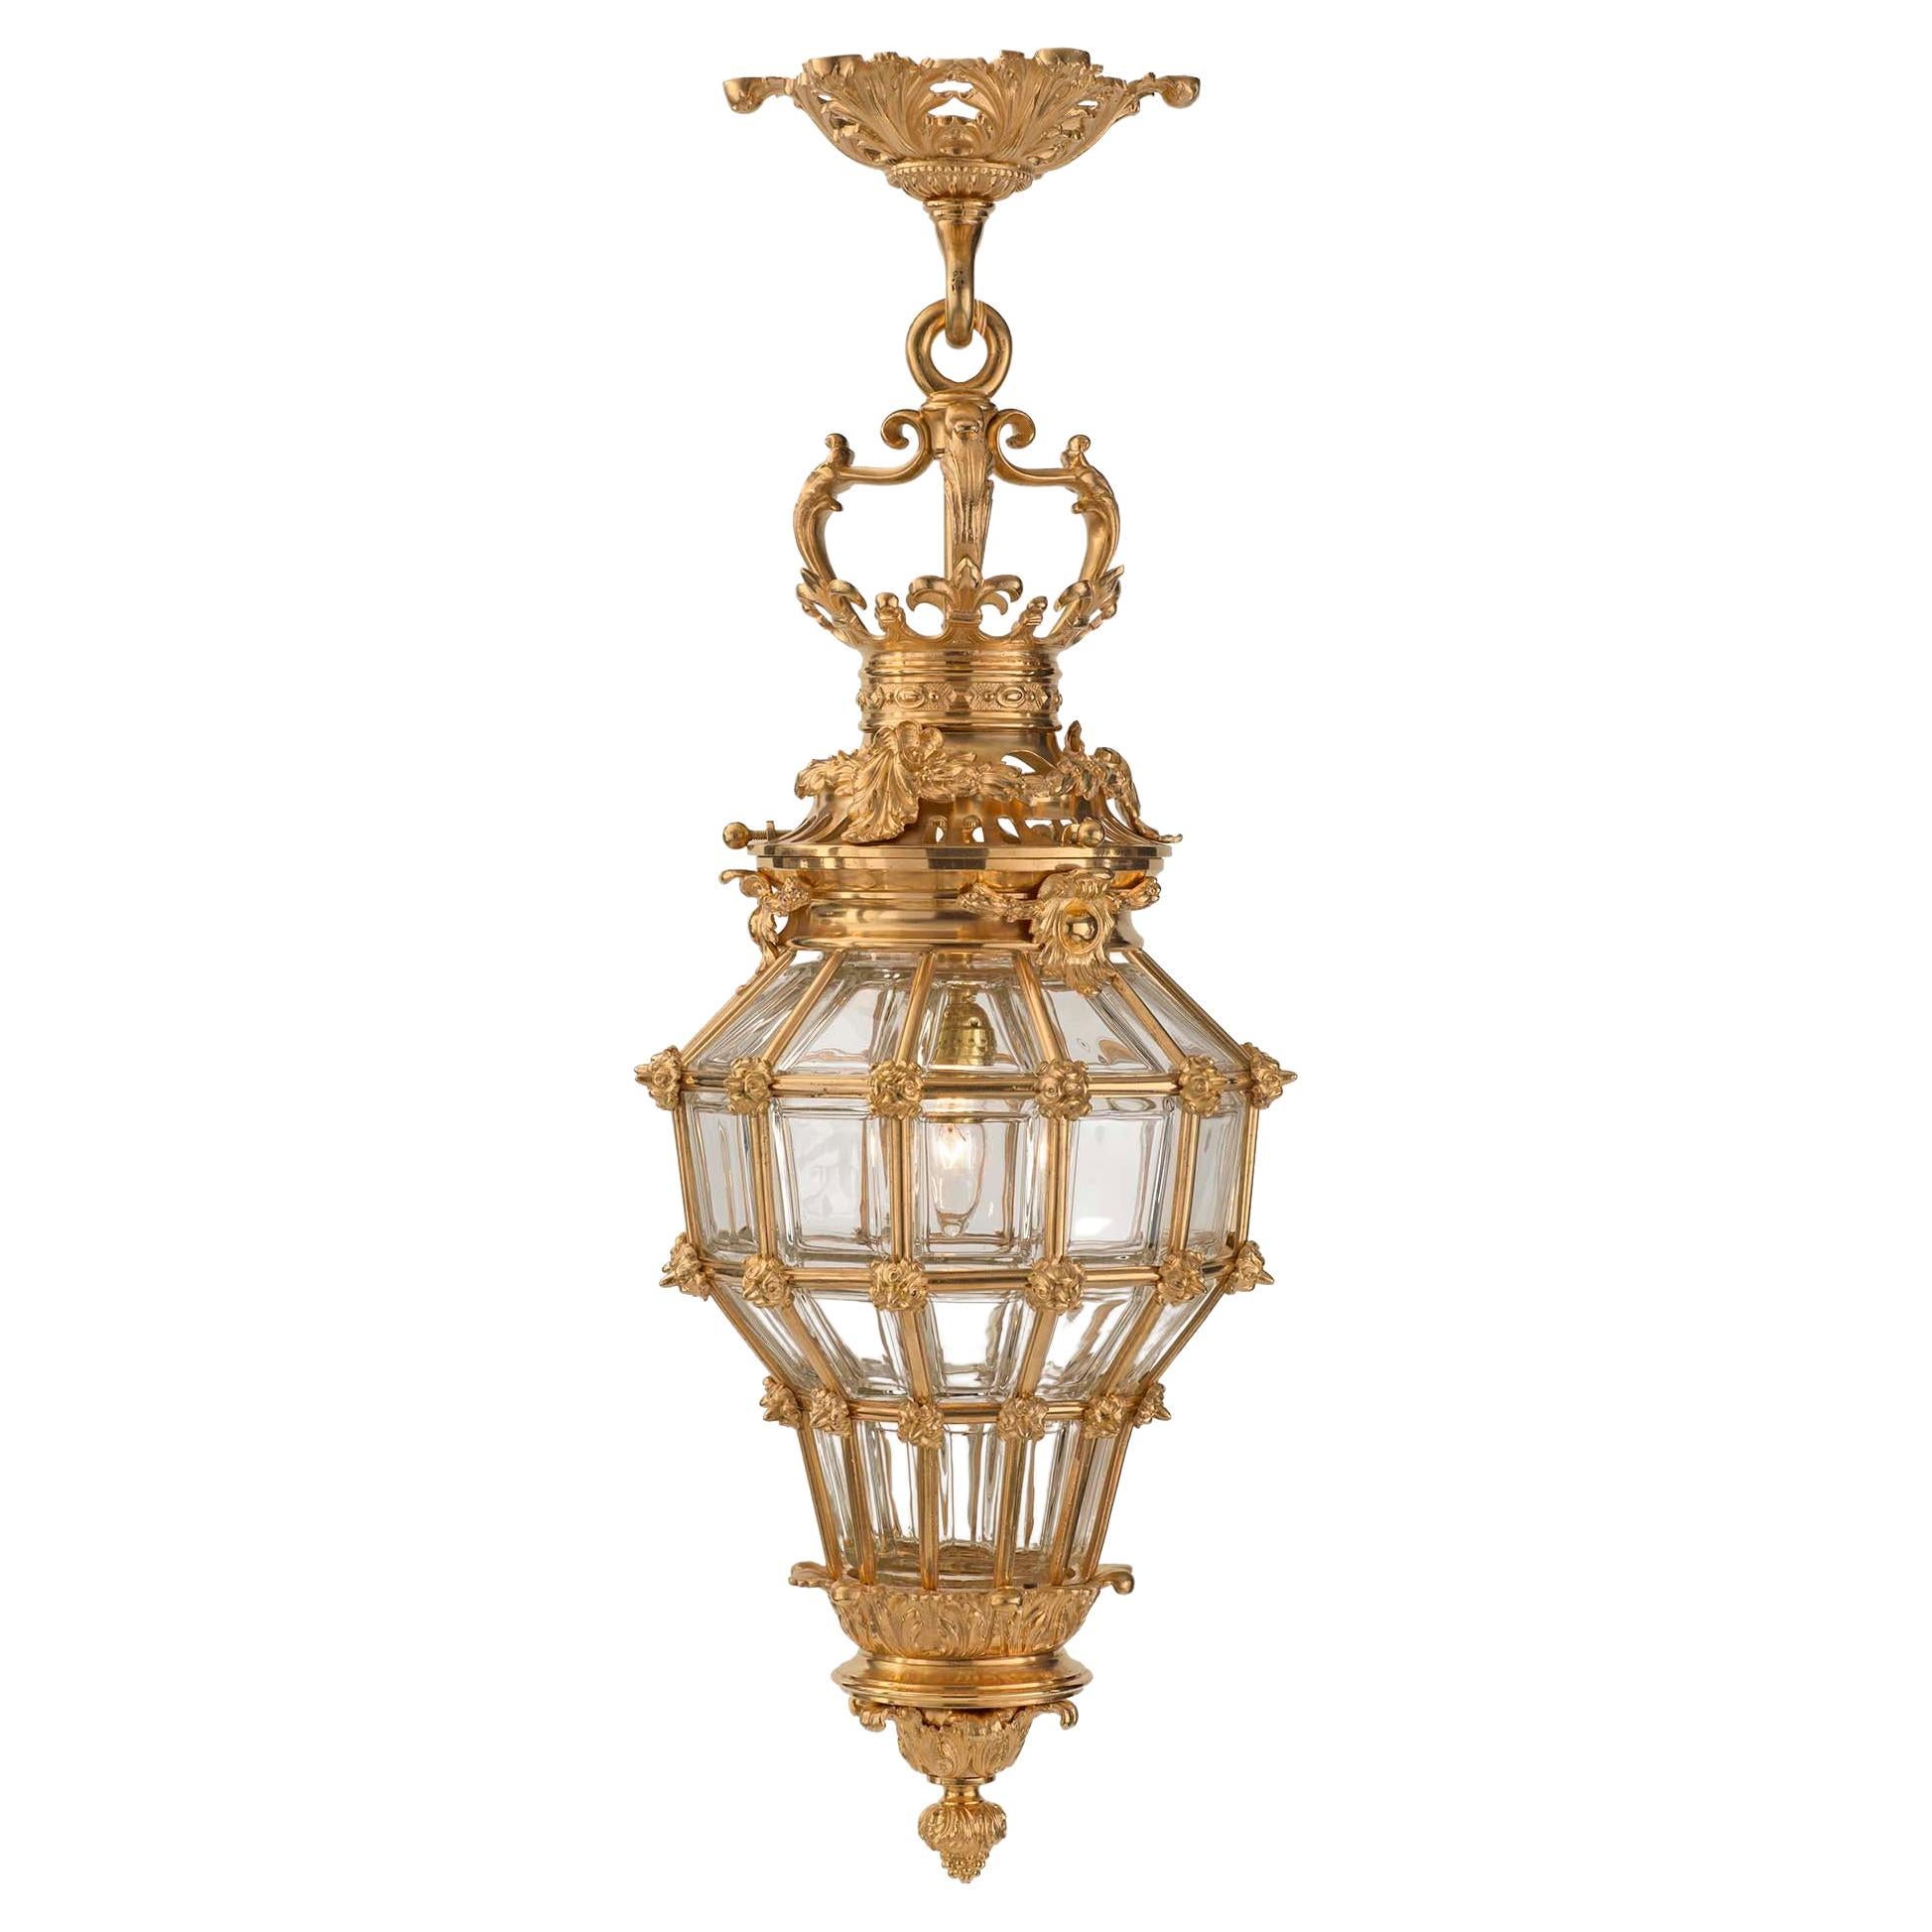 French 19th Century Louis XIV Style Ormolu and Crystal Lantern